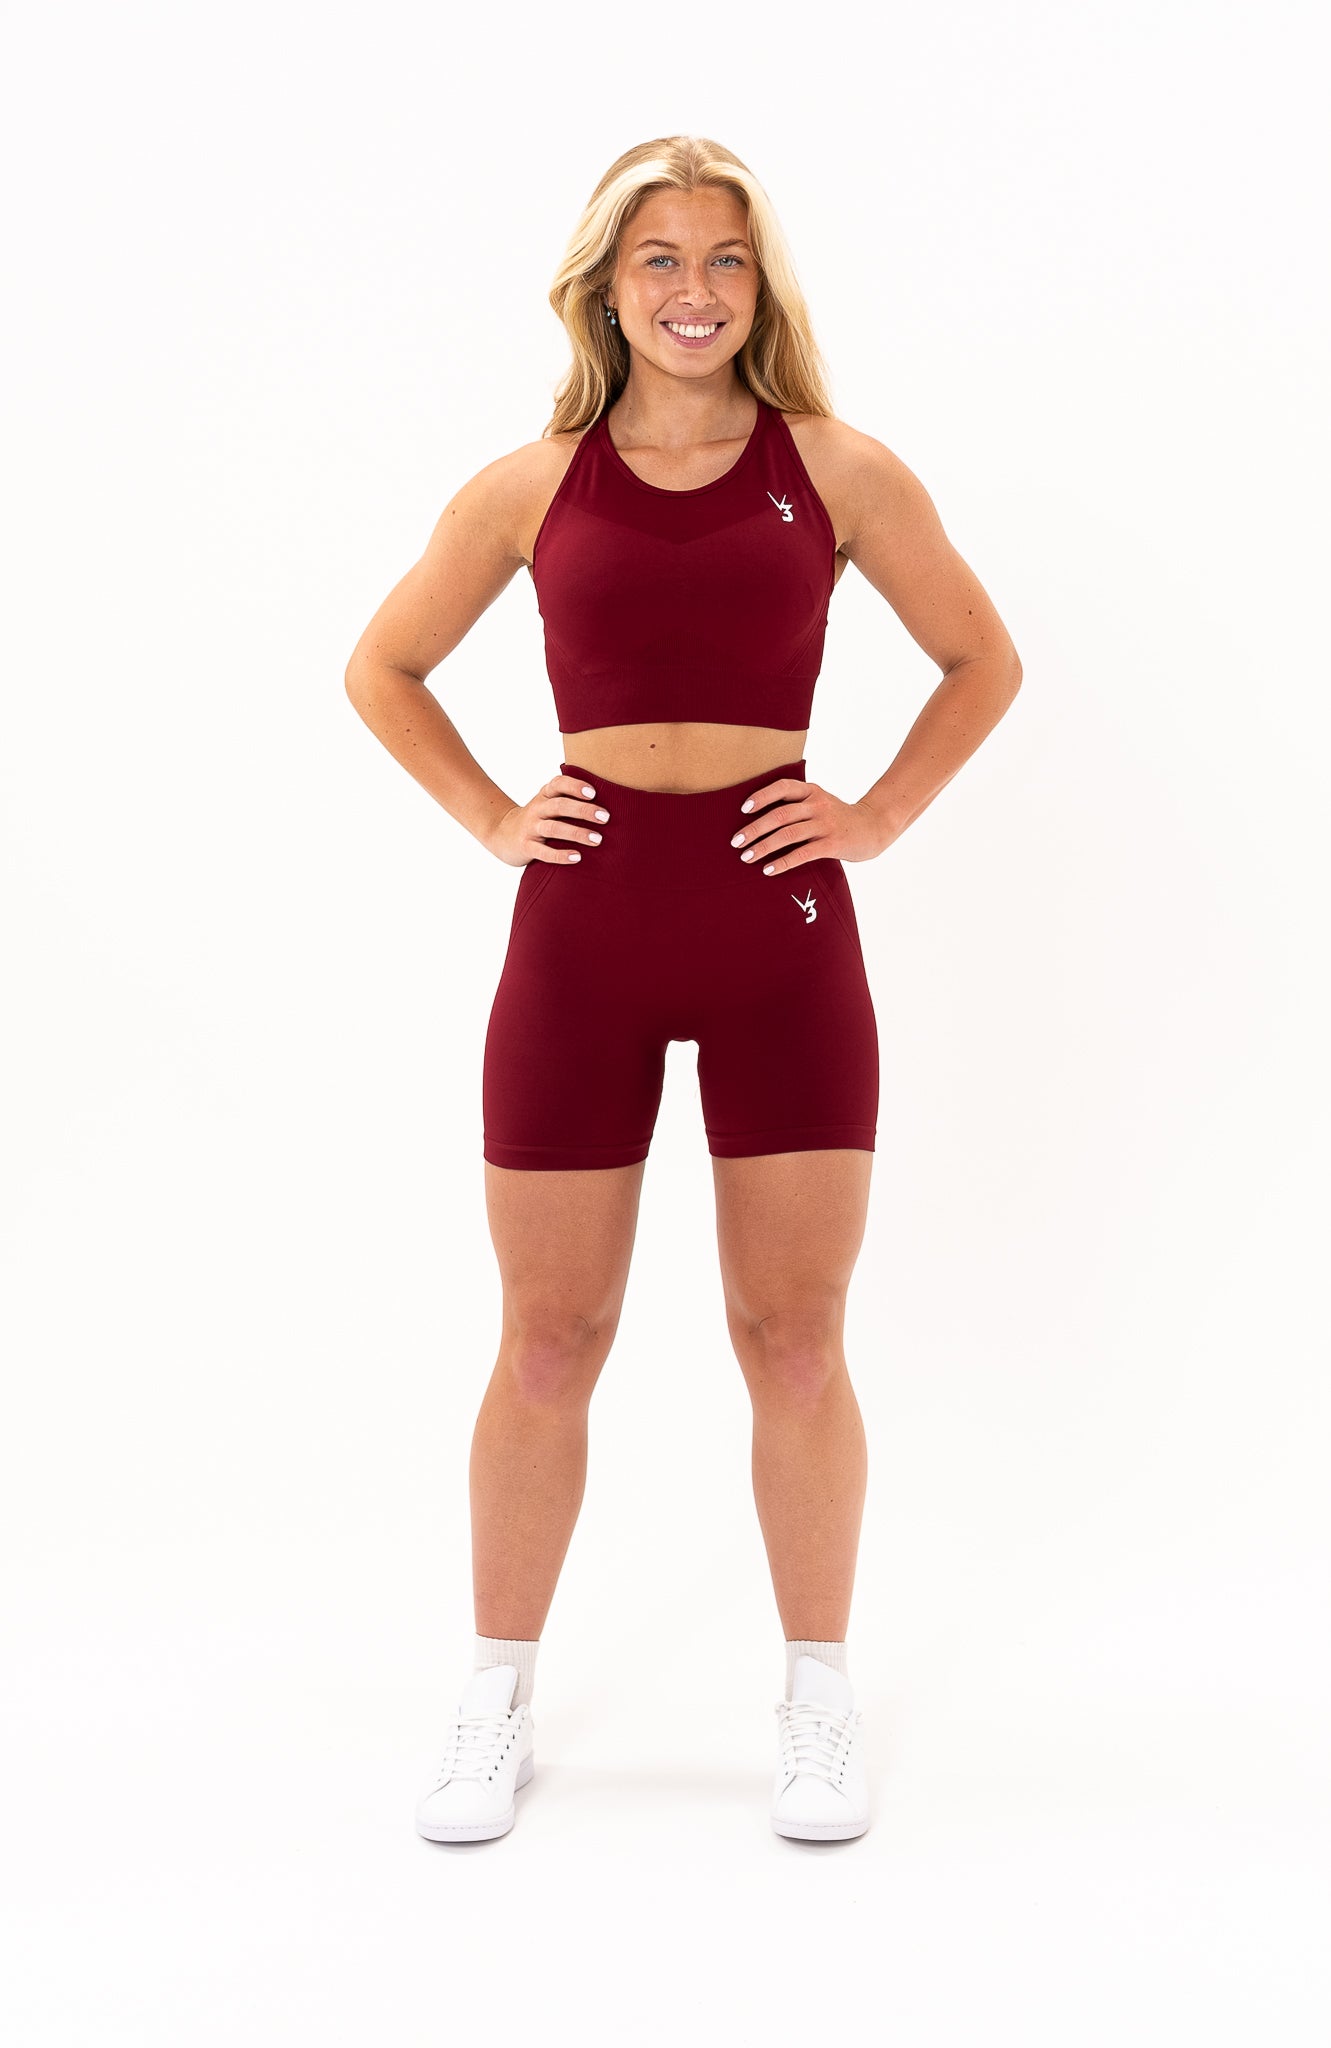 redbaysand Women's Tempo seamless scrunch bum shaping high waisted shorts and training sports bra in burgundy red – Squat proof 5 inch leg cycle shorts and training bra for Gym workouts training, Running, yoga, bodybuilding and bikini fitness.